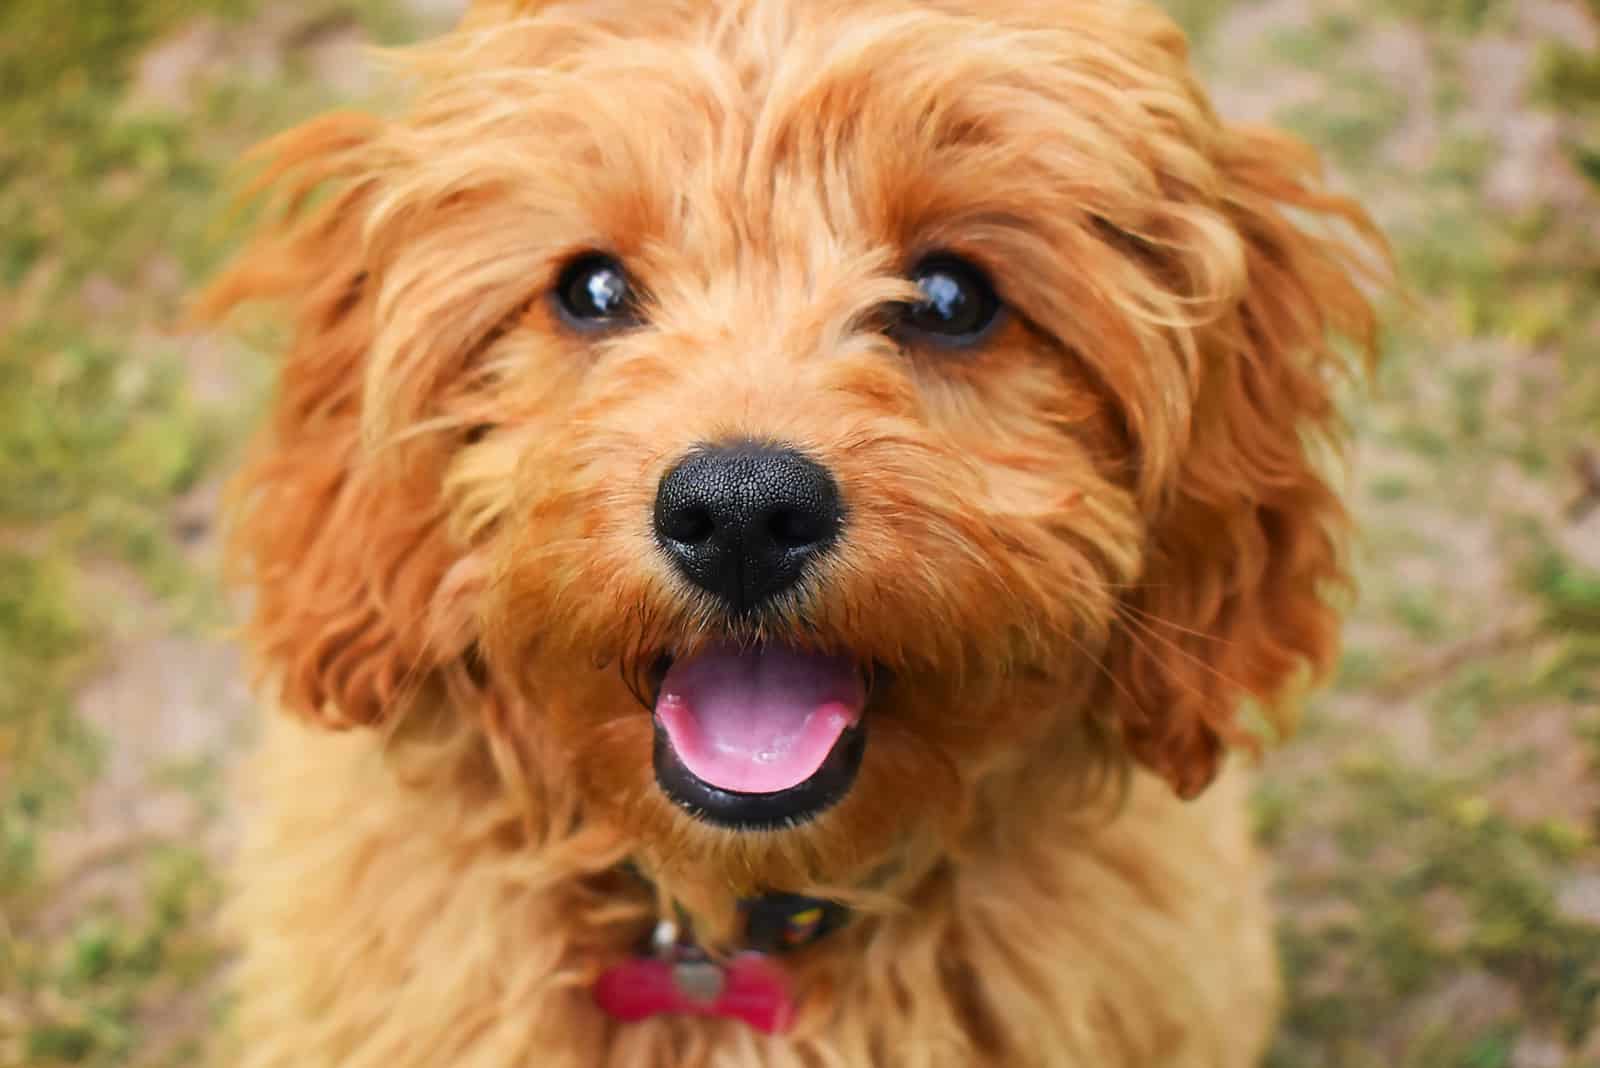 7 Reasons Why The F1B Cavapoo Should Be Your Fur-ever Friend